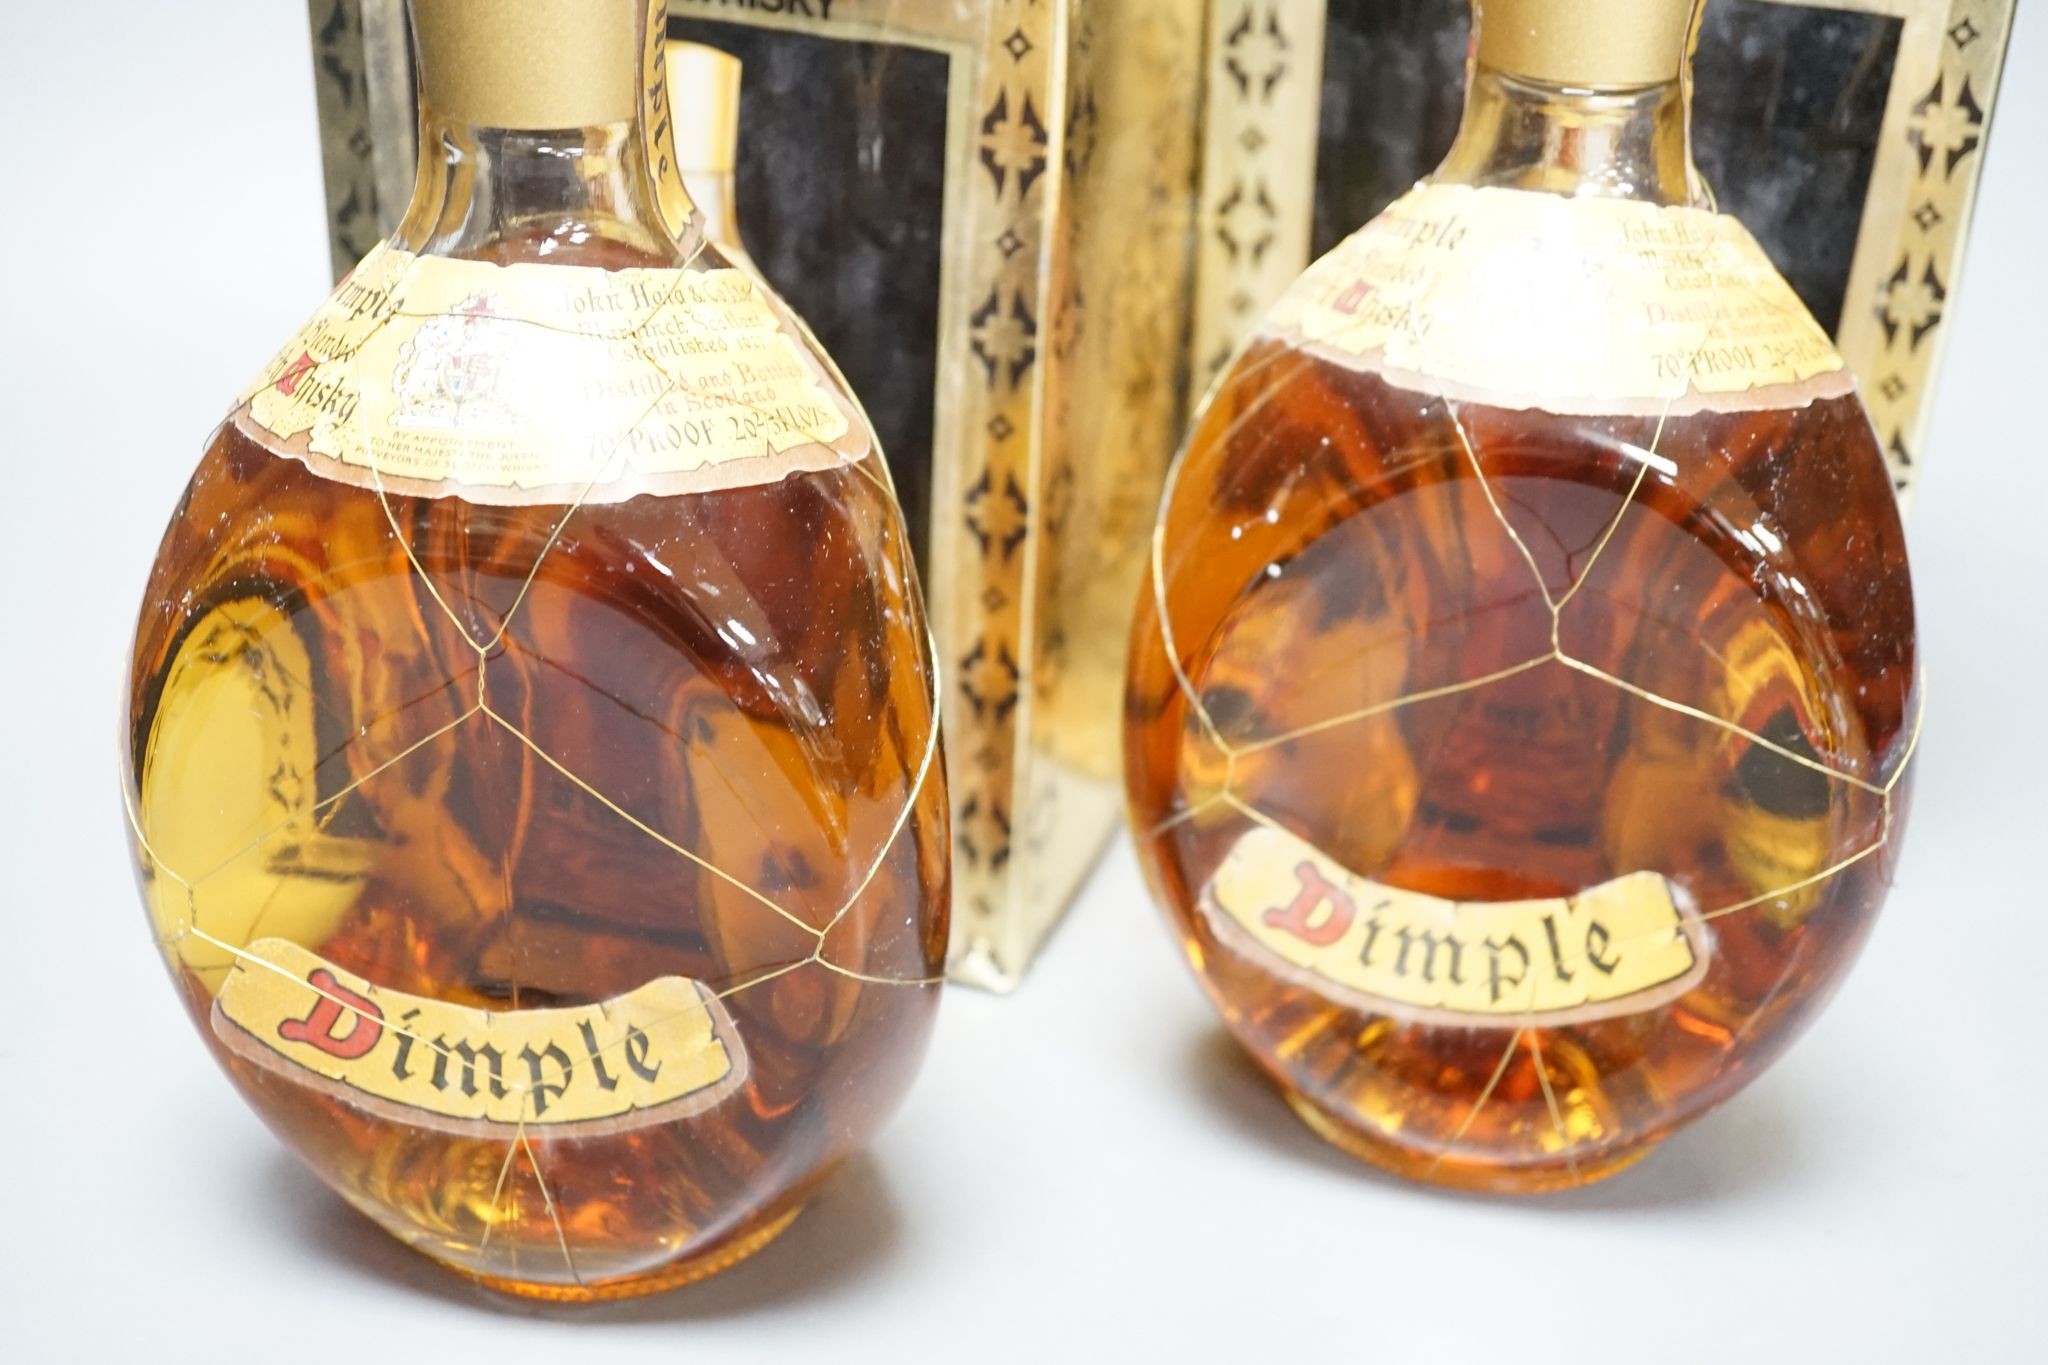 Two boxed bottles of Dimple Scotch whisky. - Image 4 of 4